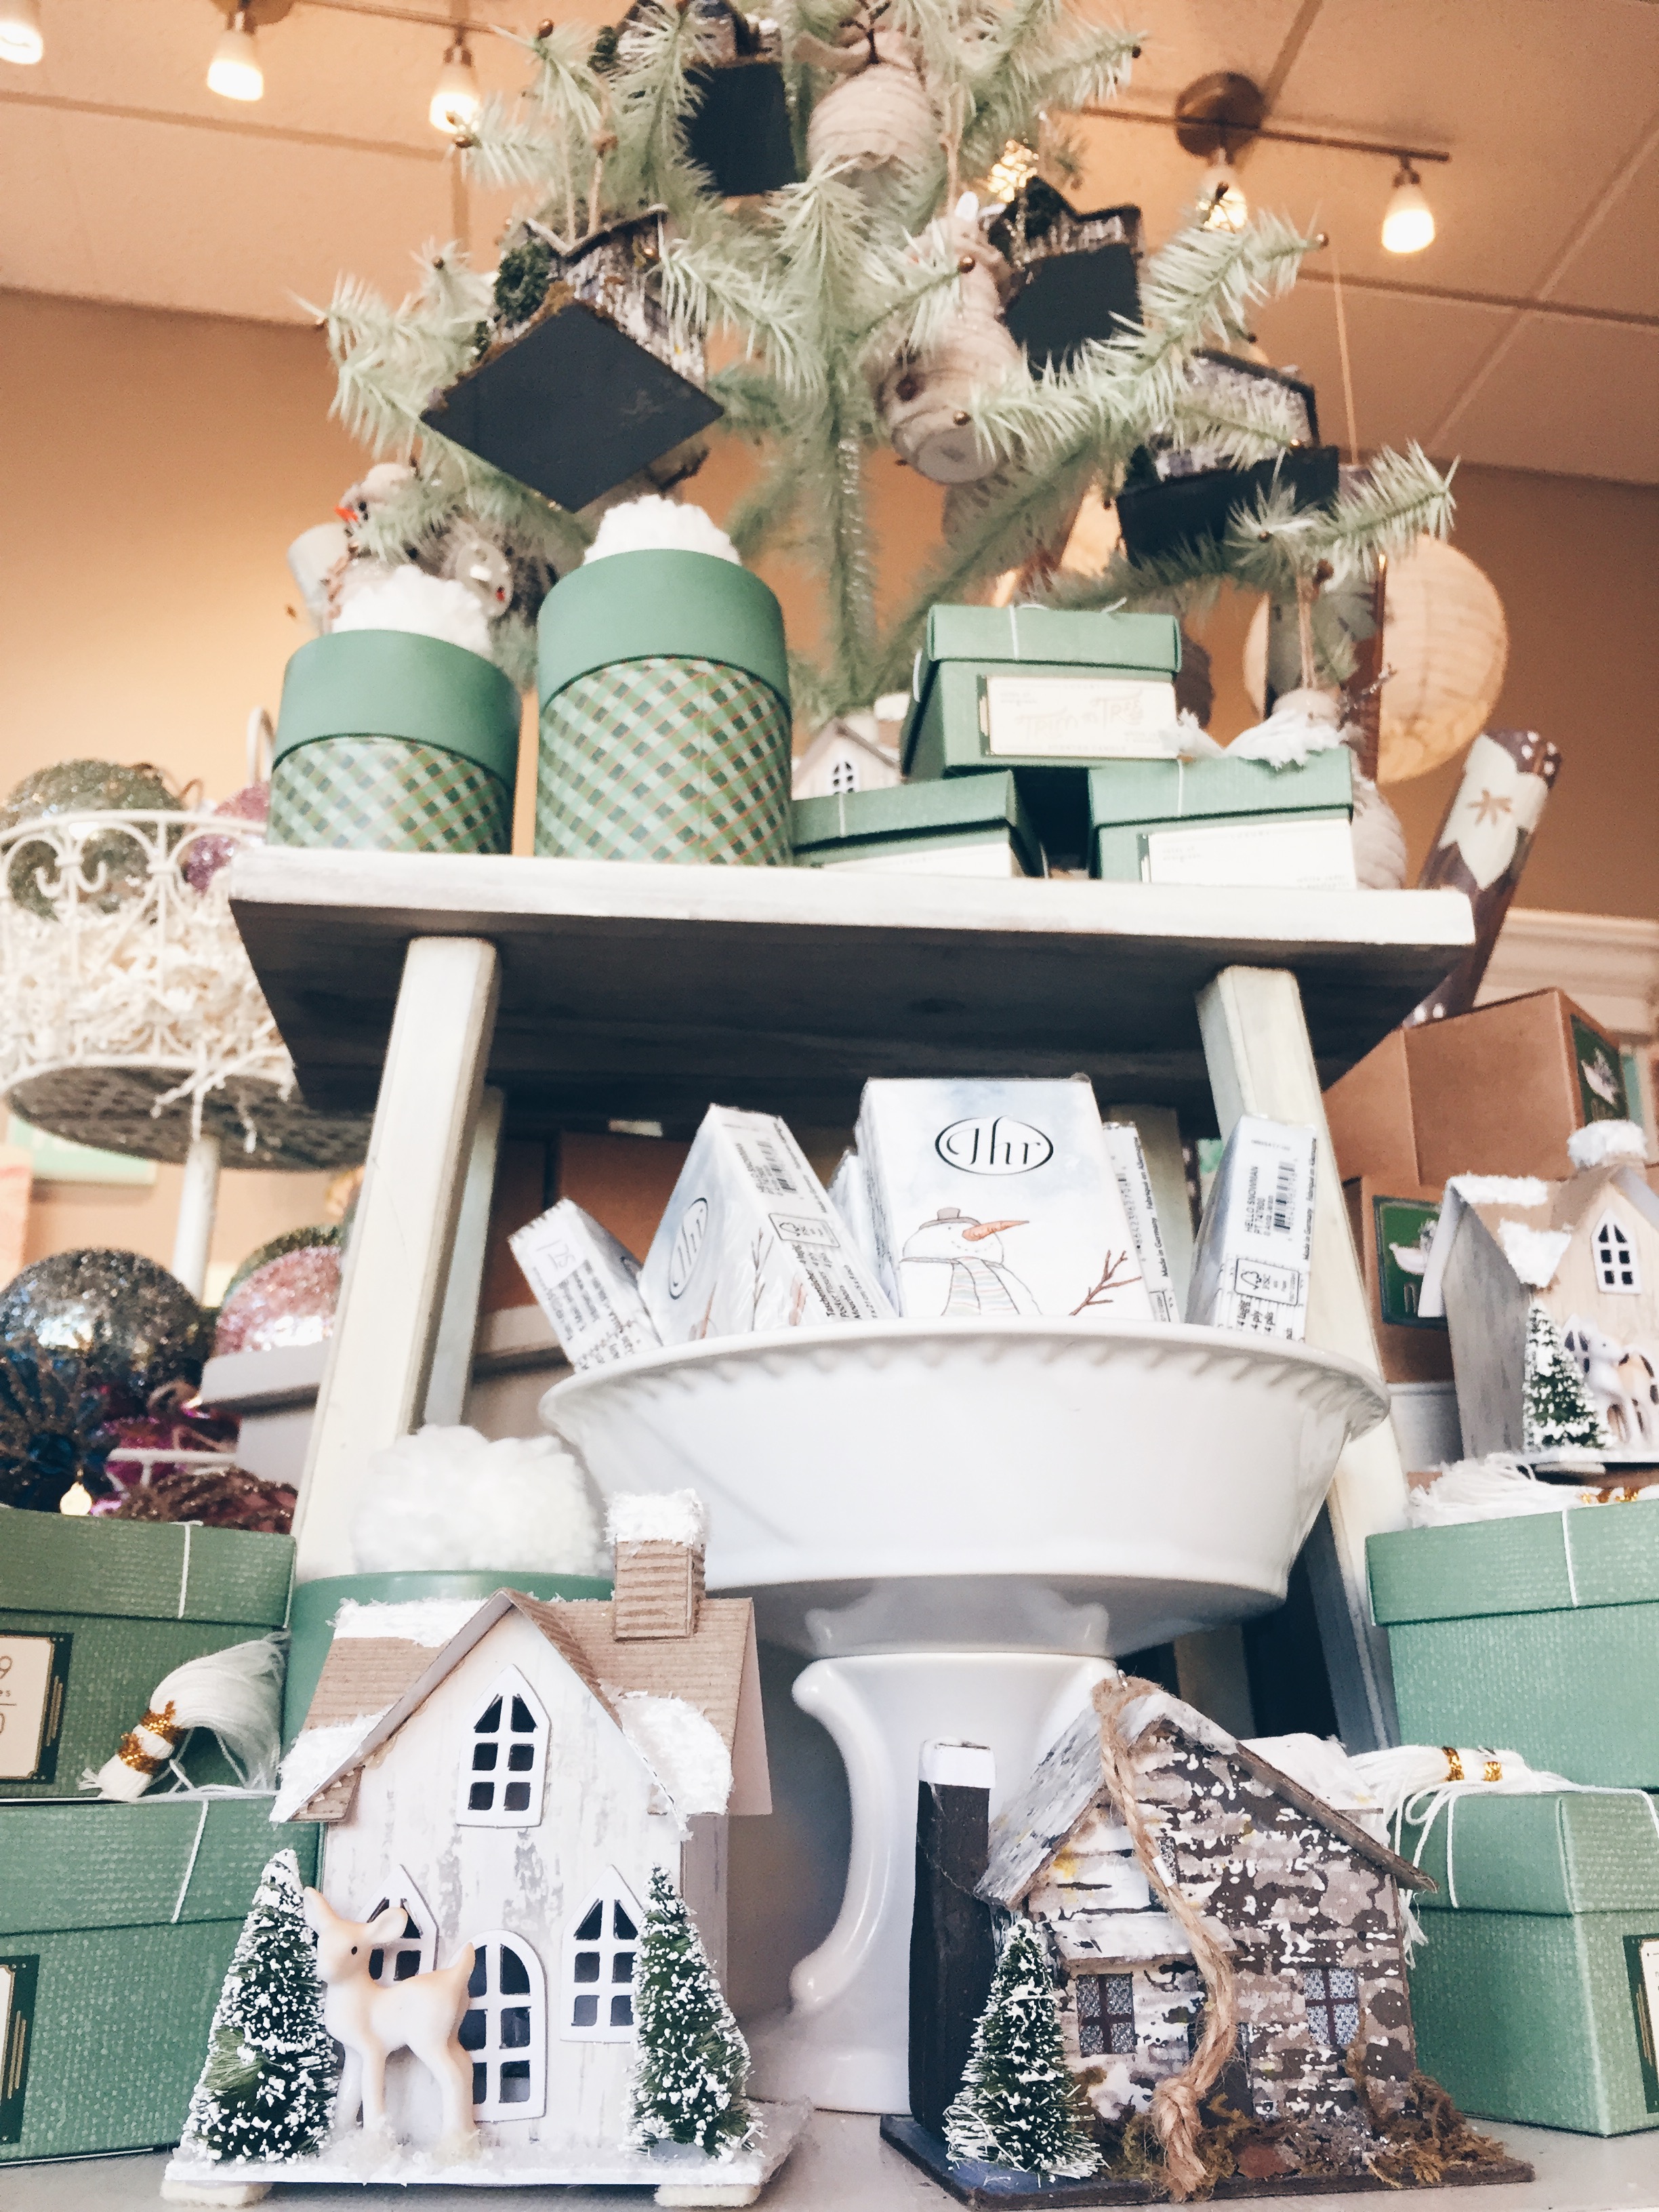 Holiday gifts- adorable ornaments, candles, and more!